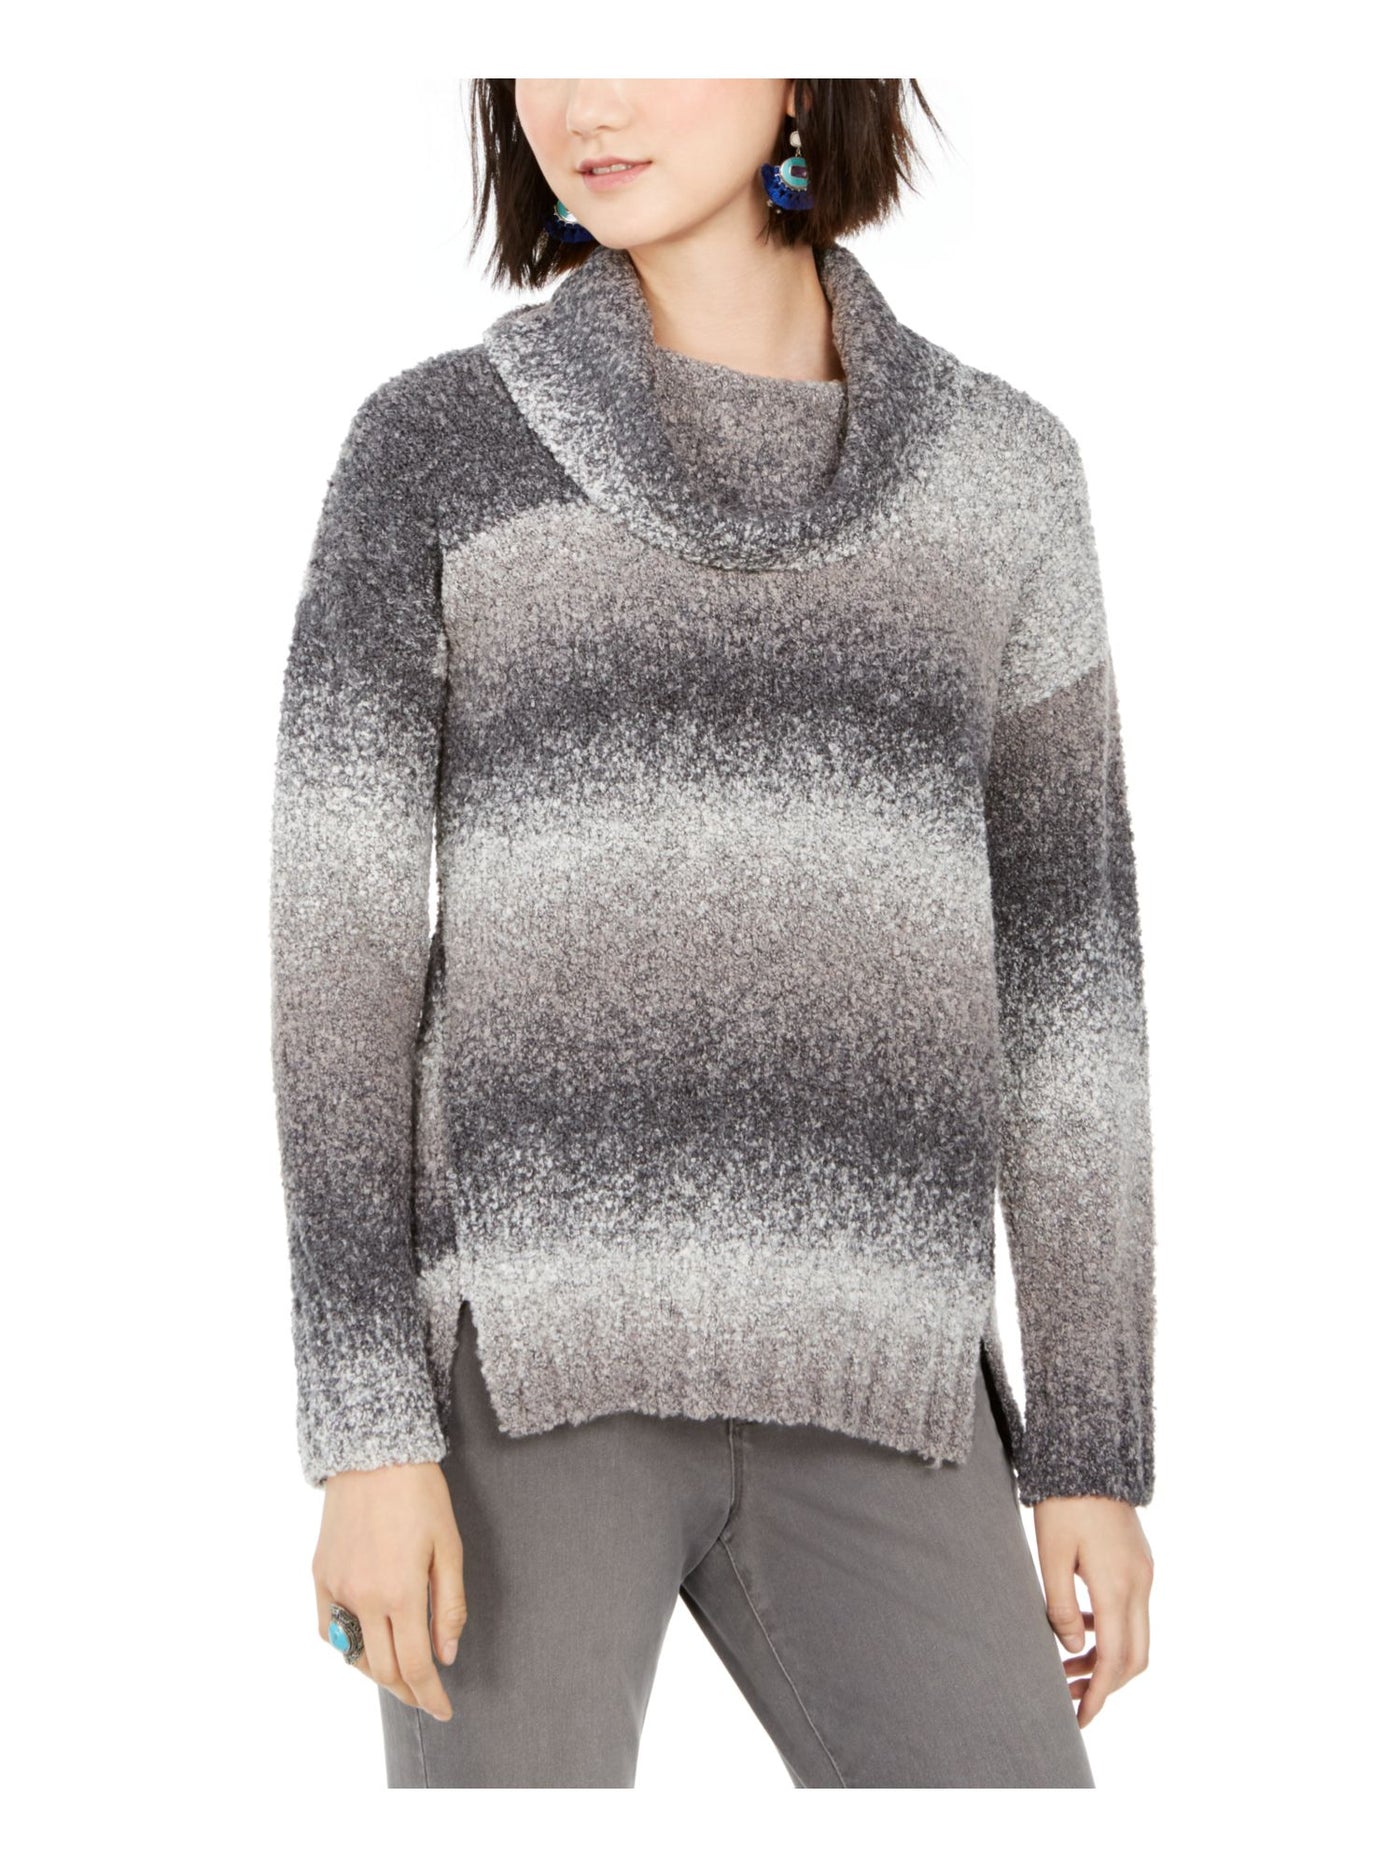 STYLE & COMPANY Womens Gray Ombre Long Sleeve Turtle Neck T-Shirt Petites PS